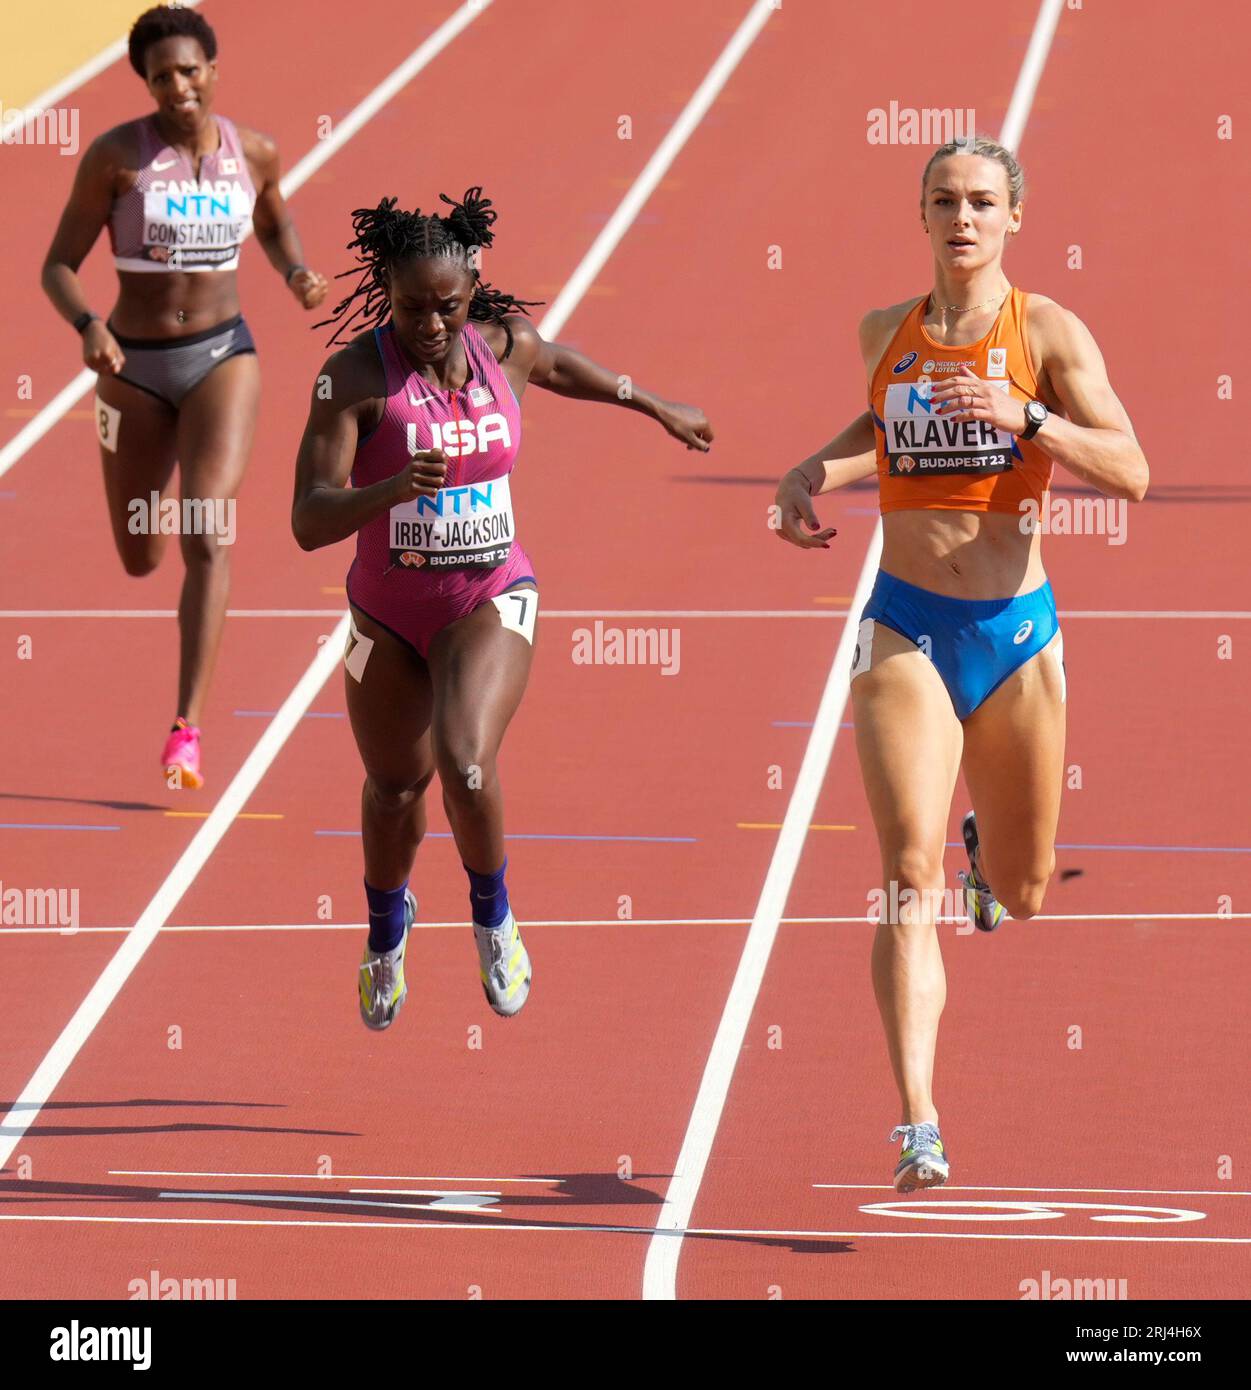 Budapest,HUN,  20 Aug 2023  Kyra Constantine(CAN) (L) Lynne Orby-Jackson (USA) (C) Lieke  Klaver (NED) in action during the World Athletics Championships 2023 National Athletics Centre Budapest at National Athletics Centre Budapest Hungary on August 20 2023 Alamy Live News Stock Photo